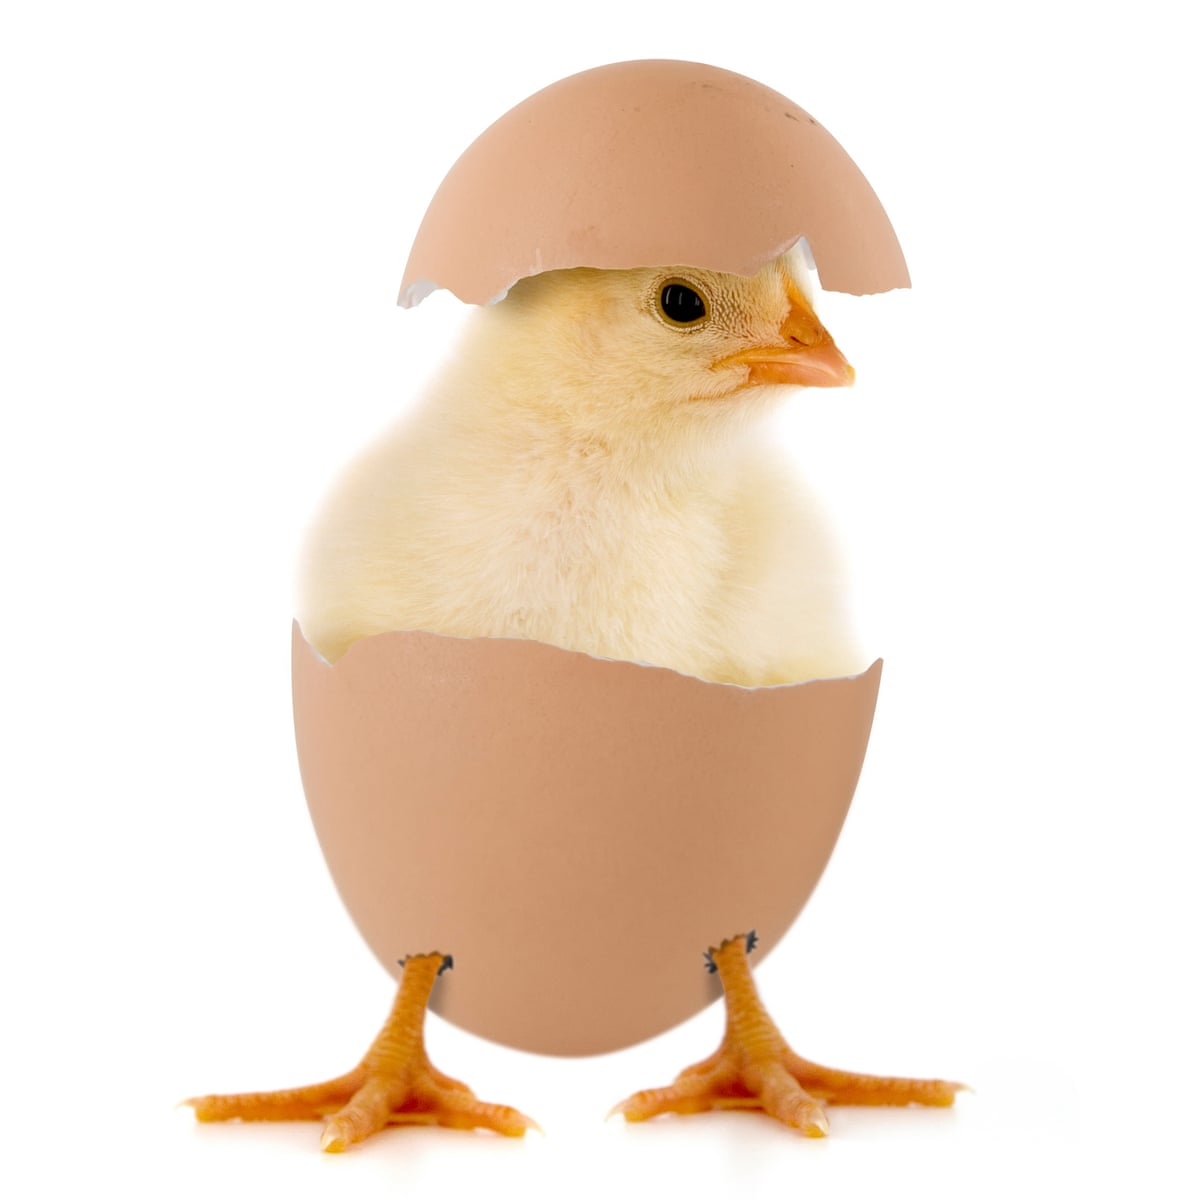 Does every box of eggs contain a potential chick? | Eggs | The Guardian